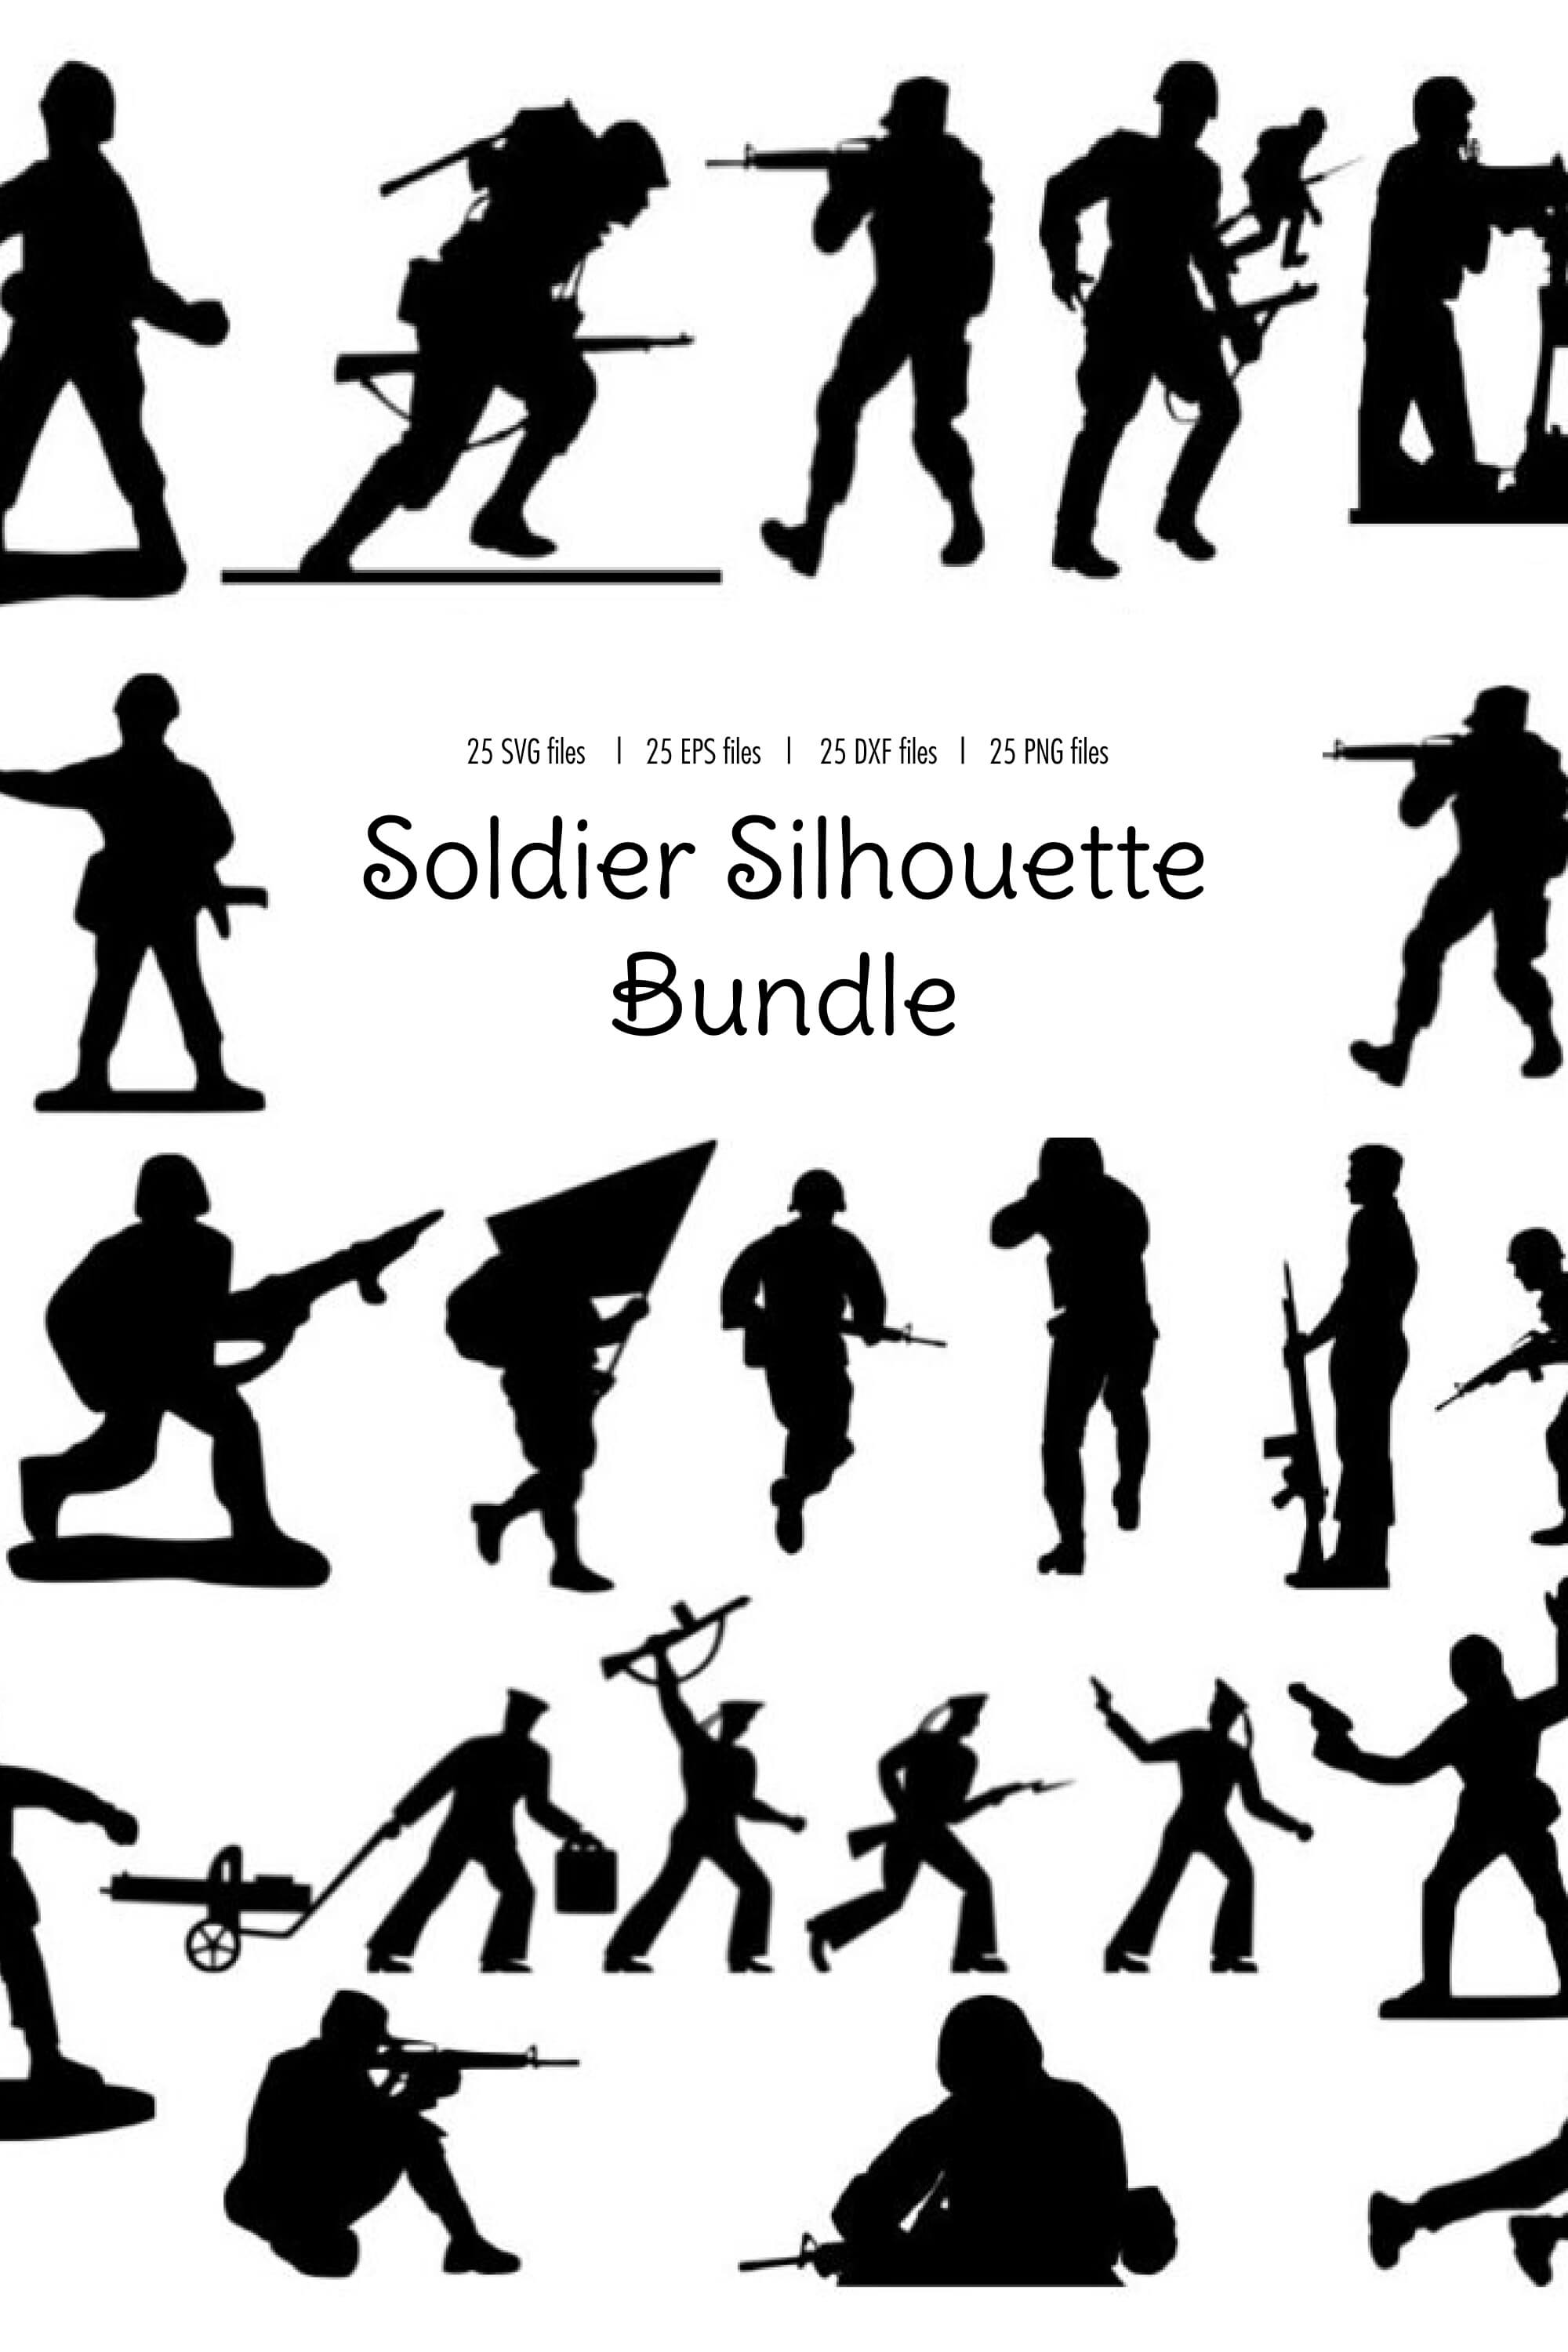 Silhouettes of soldiers with flags, muskets, machine guns and cannons.